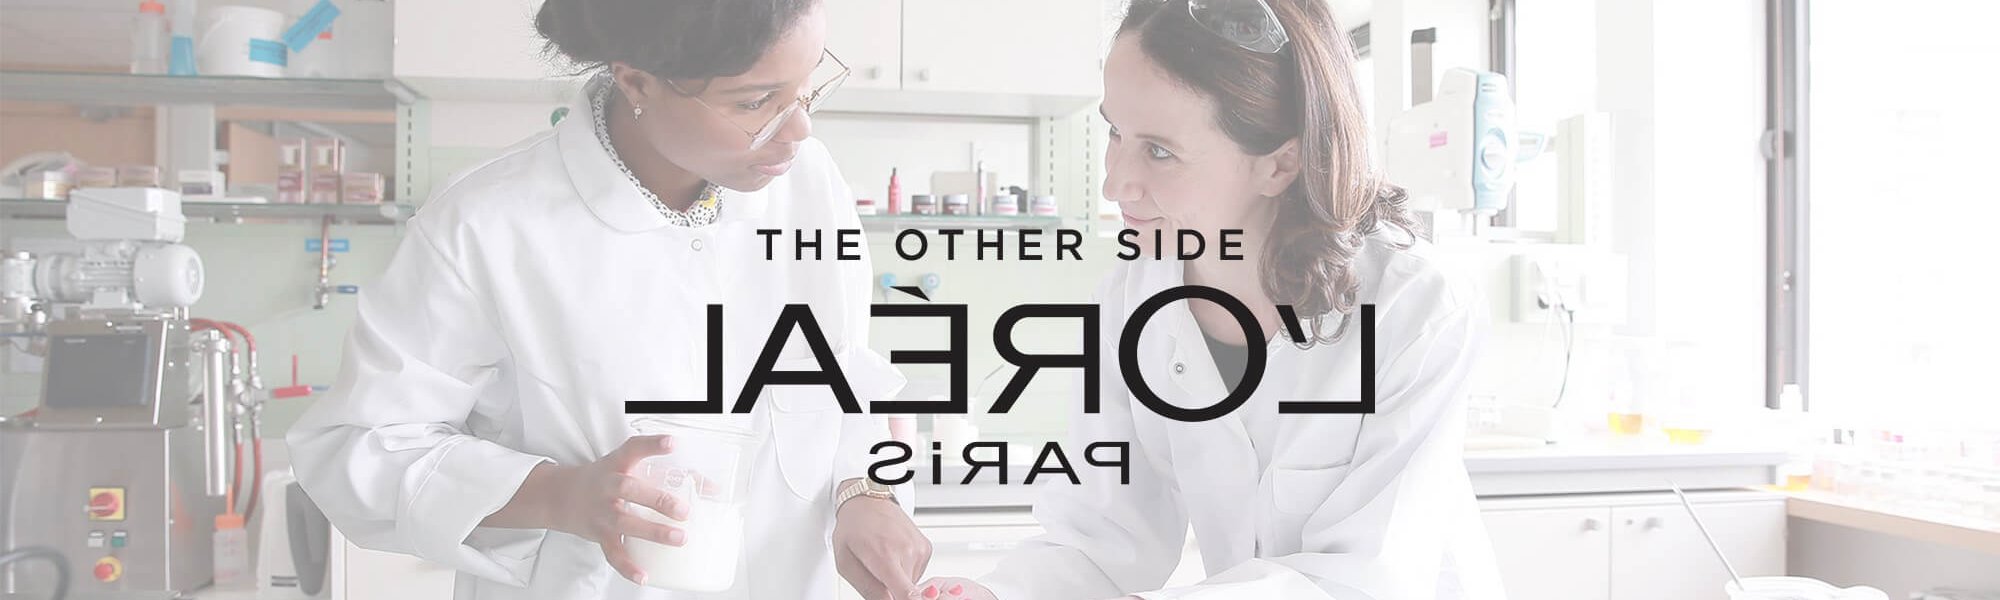 The Other Side Hero Banner 1